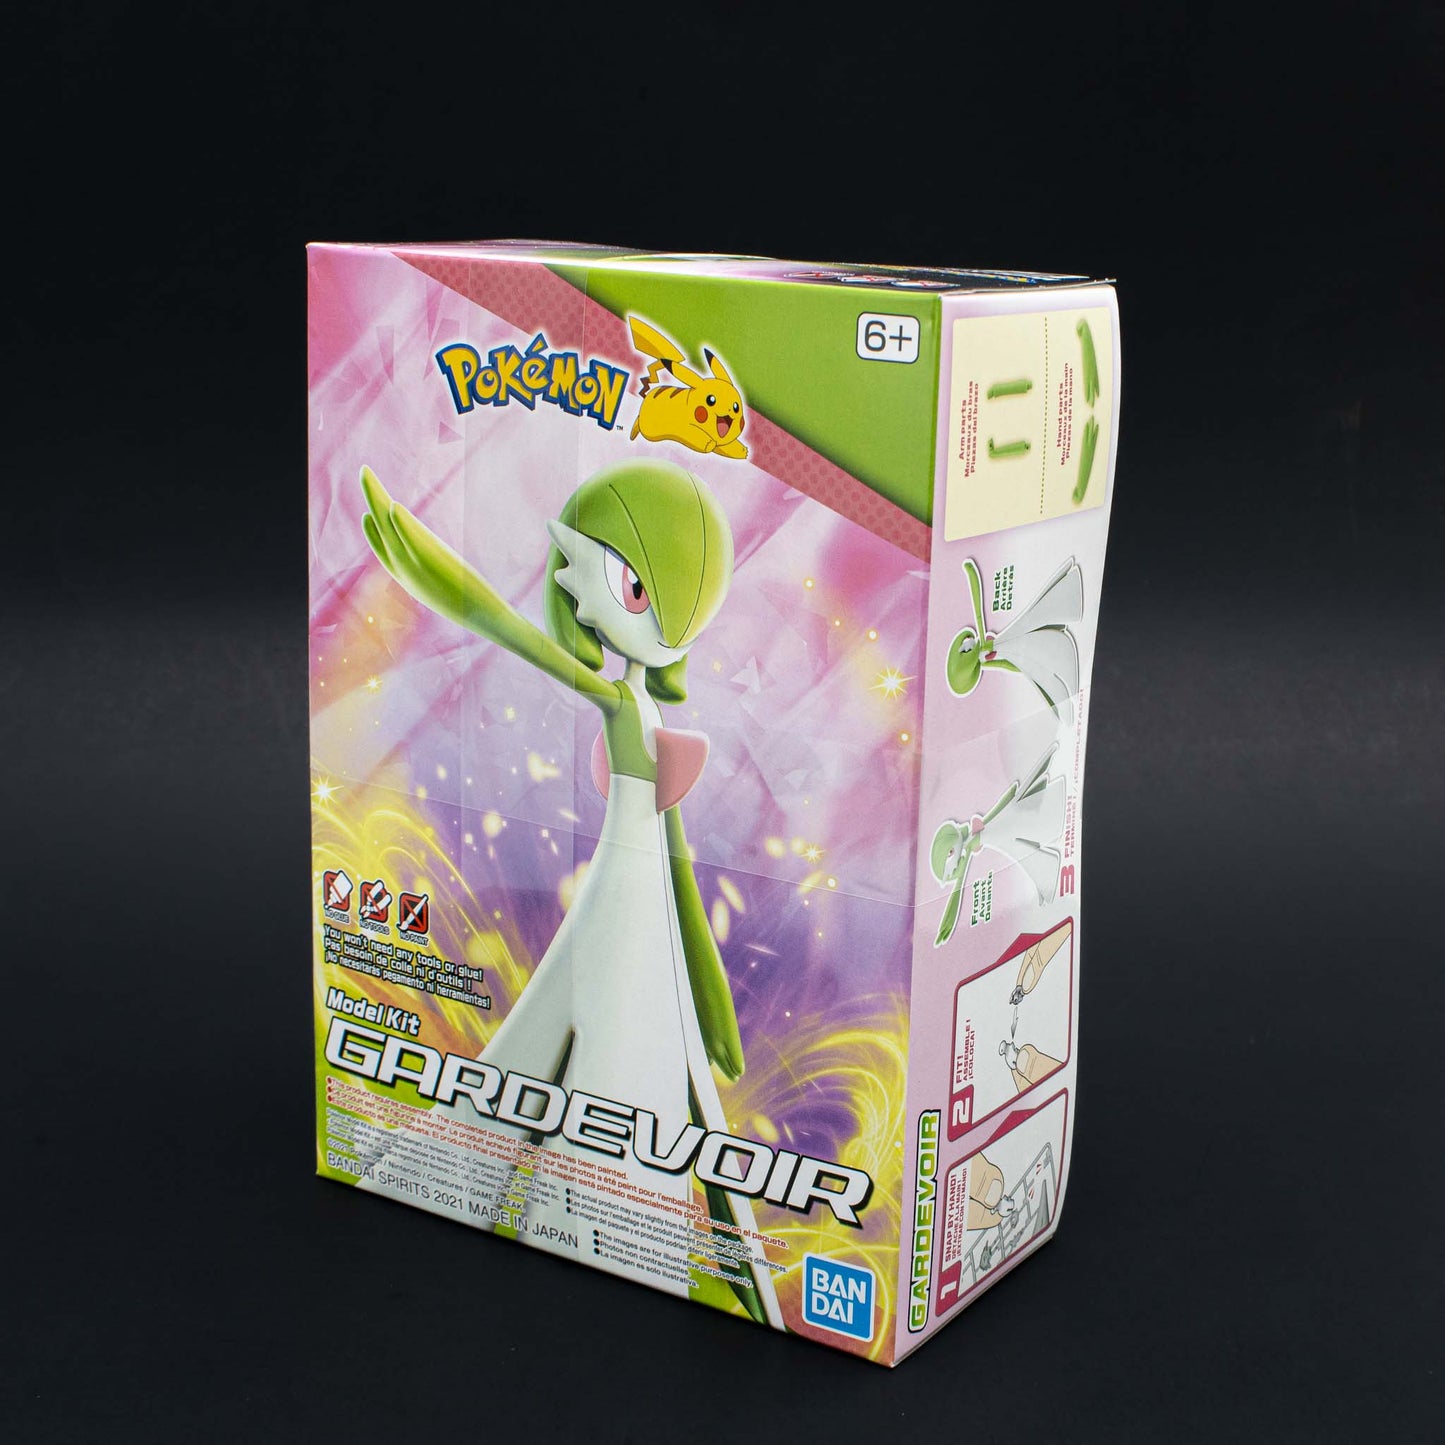 Pokemon Figure Approximately 3 Inches - Gardevoir 